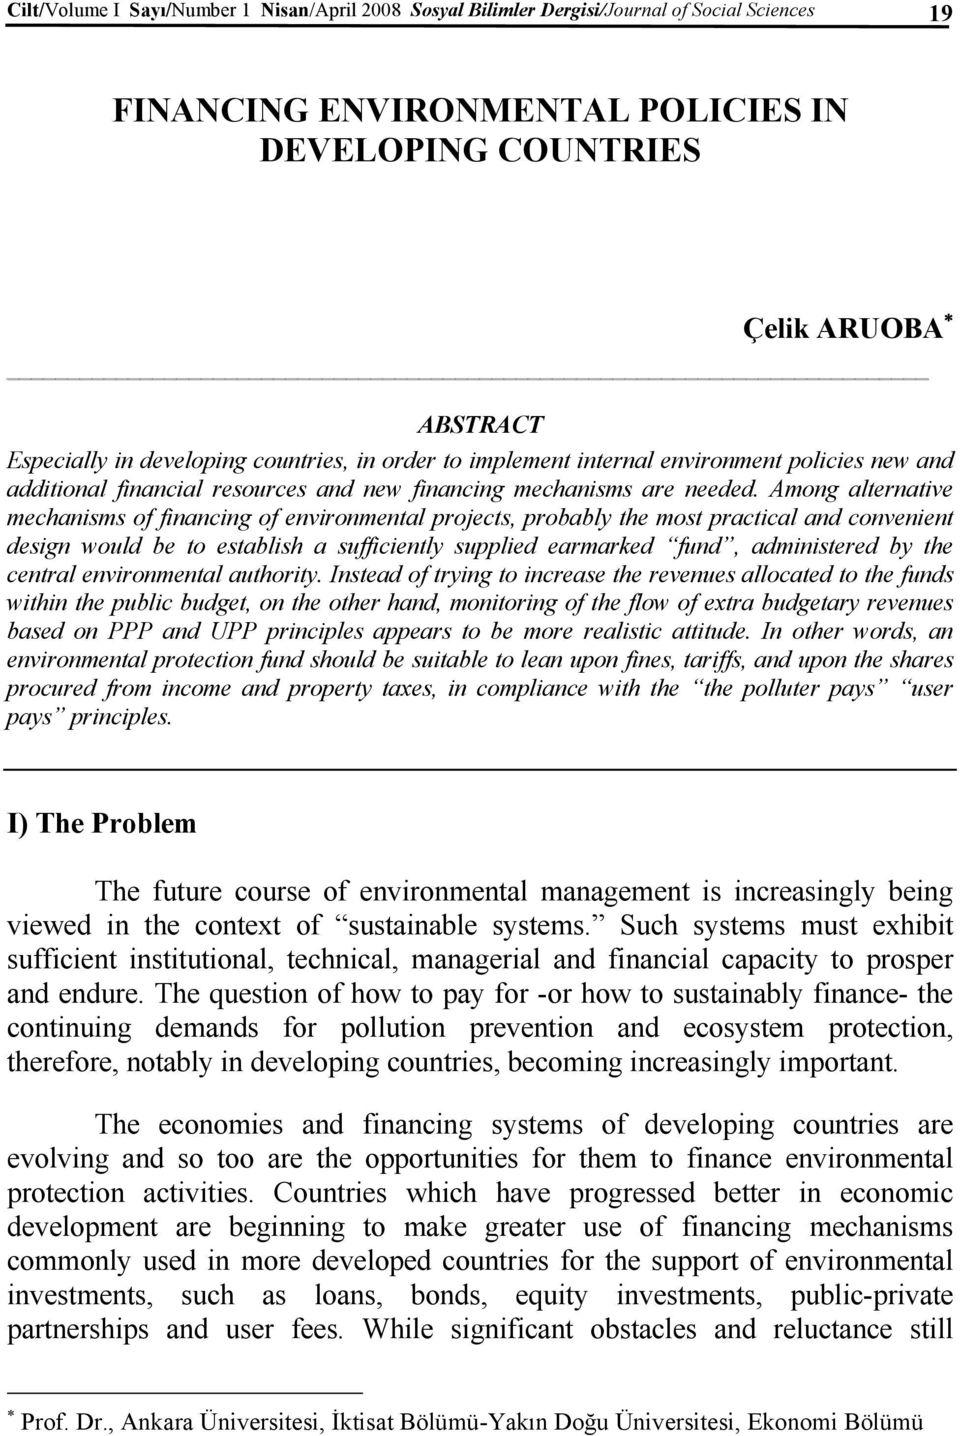 Among alternative mechanisms of financing of environmental projects, probably the most practical and convenient design would be to establish a sufficiently supplied earmarked fund, administered by